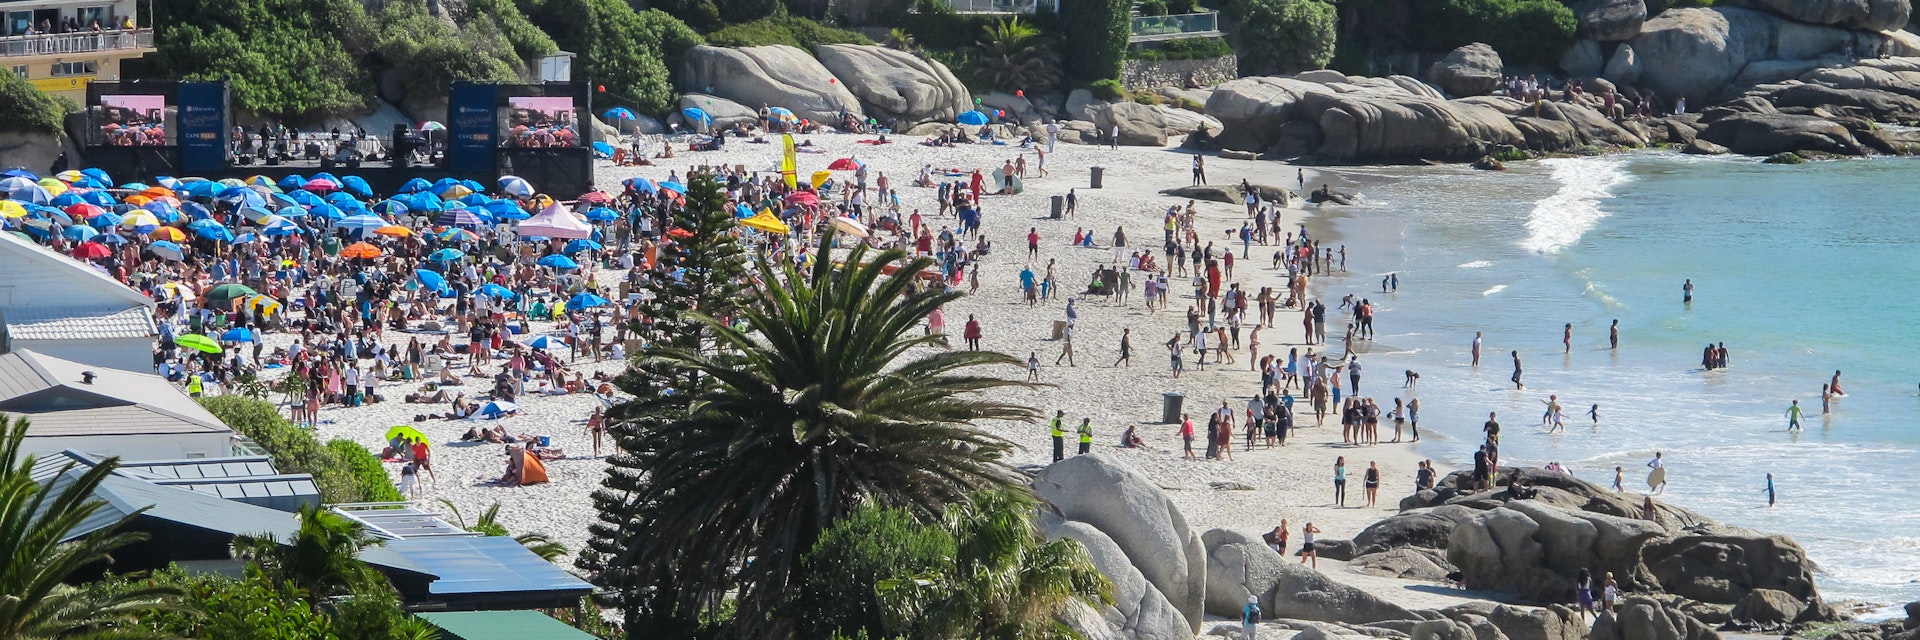 Clifton 4th beach with people on Valentines day for a special open air concert event.